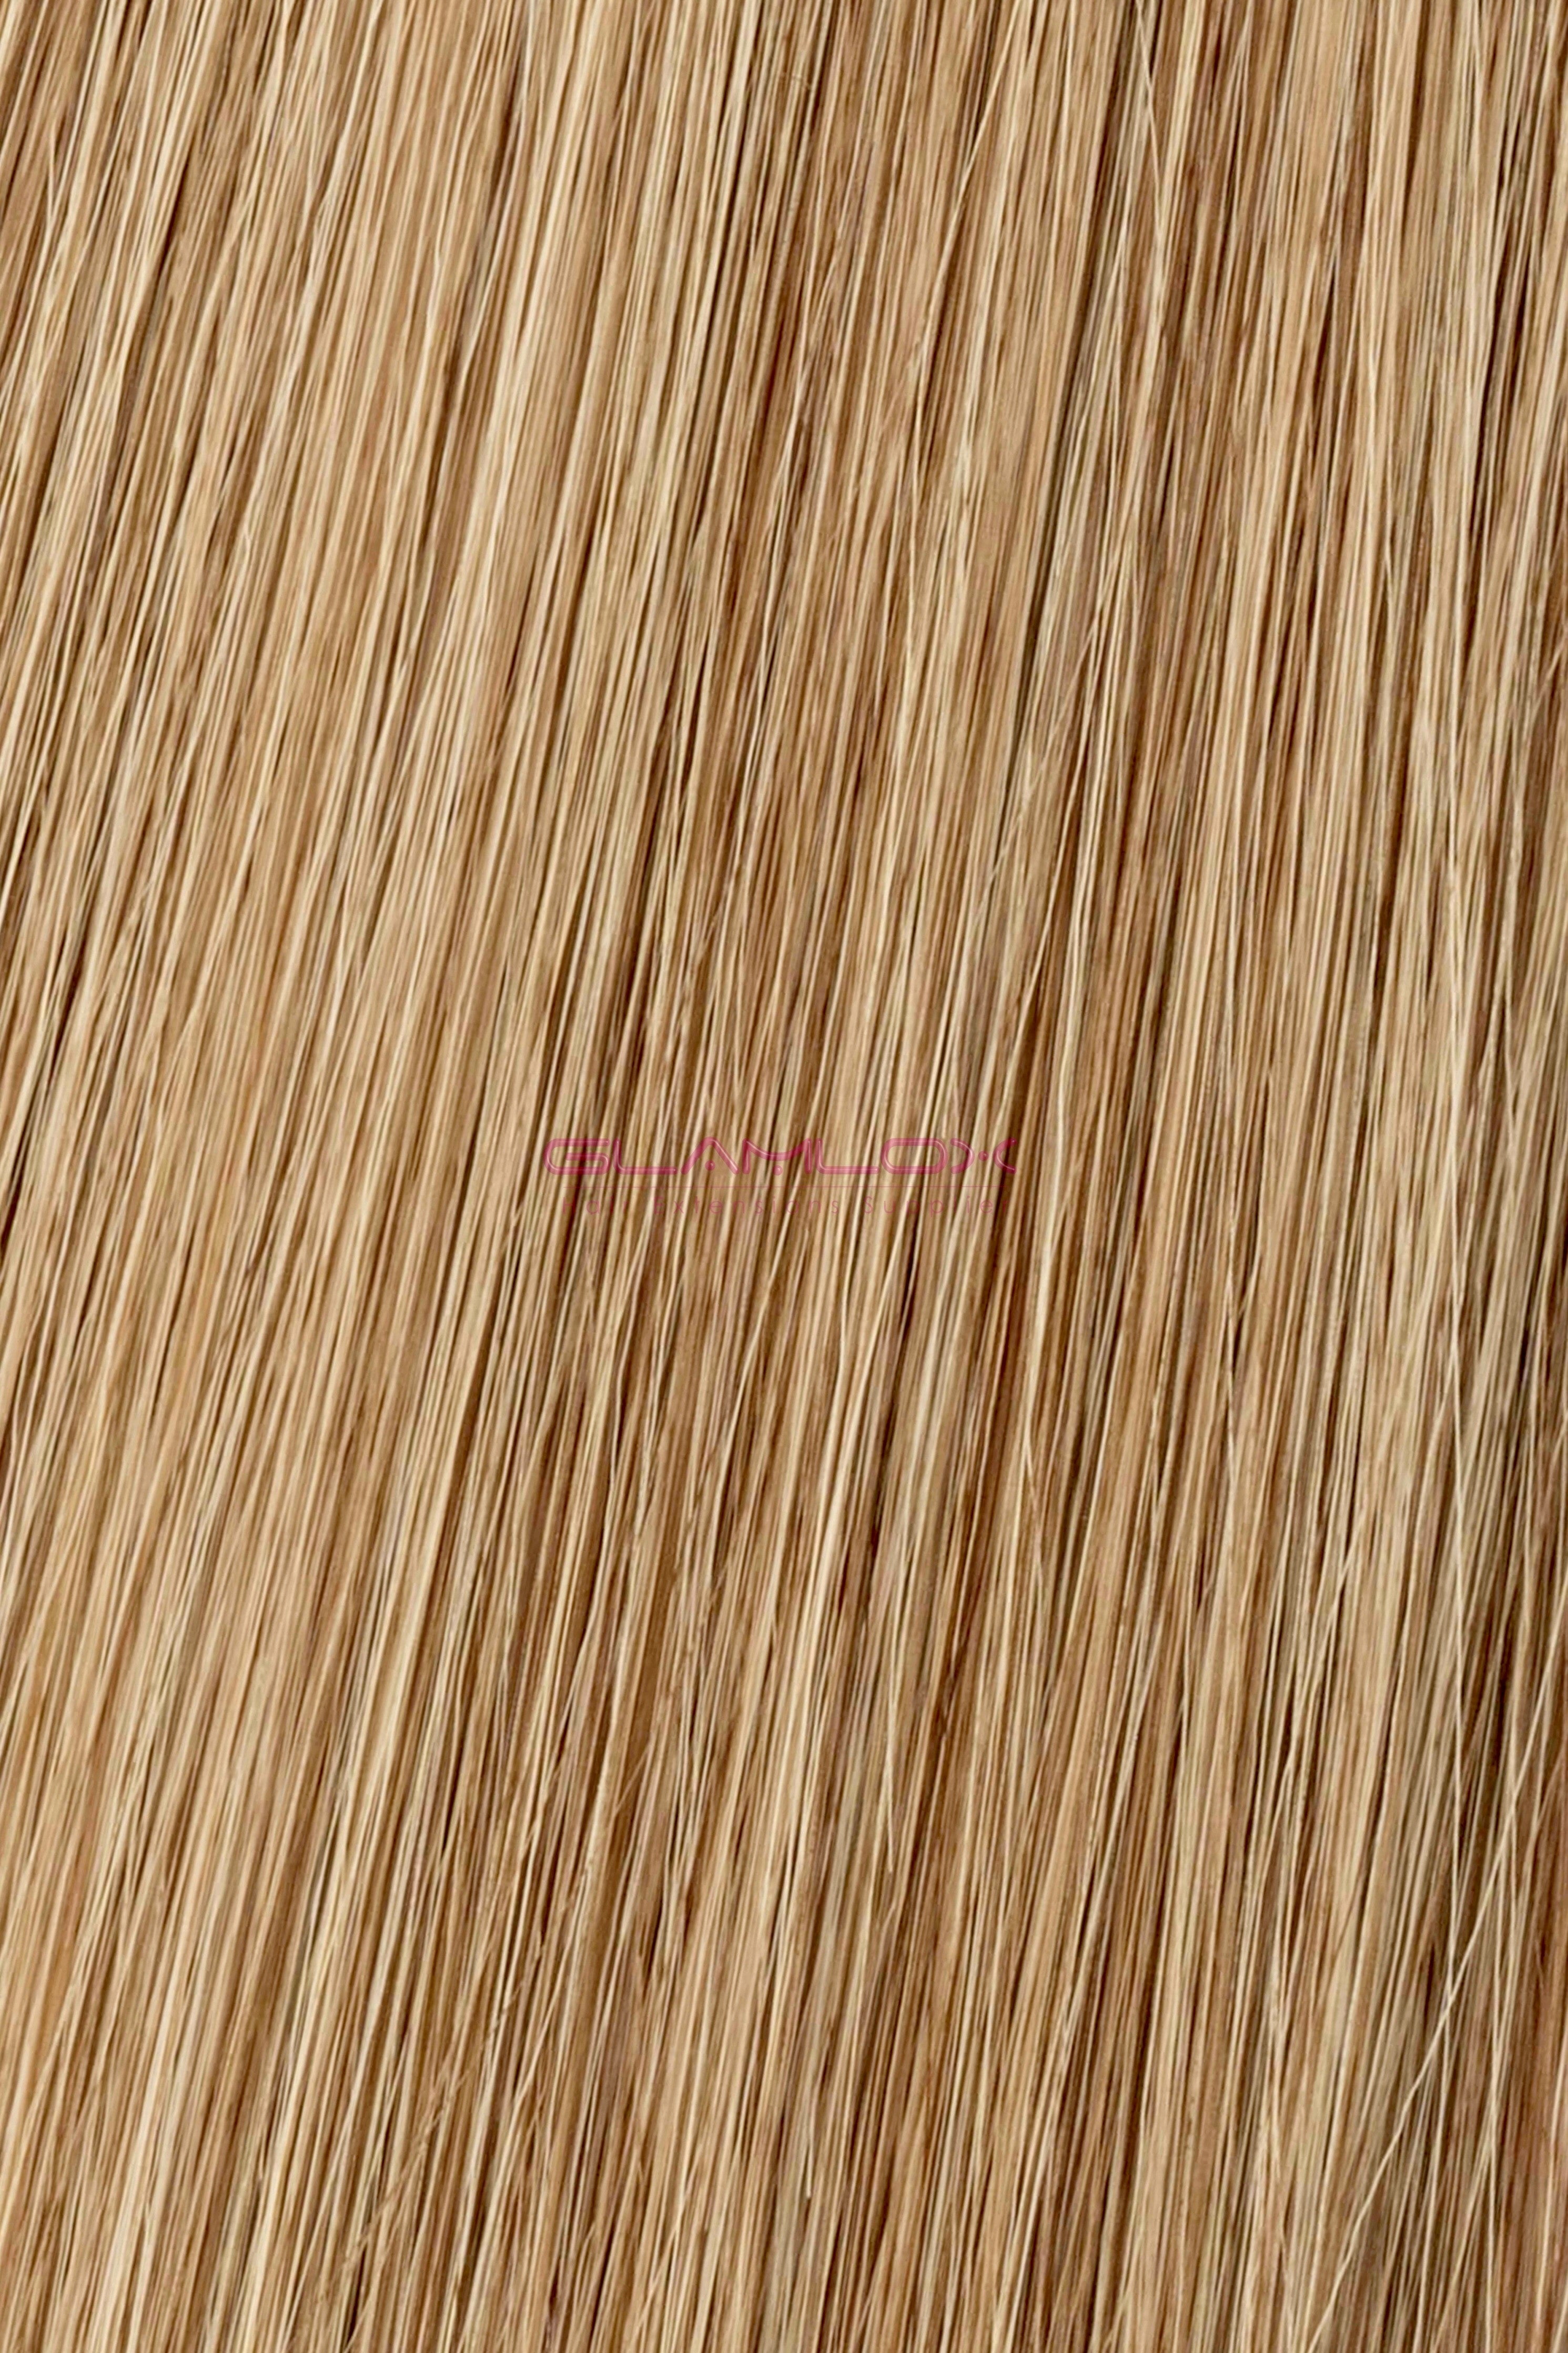 16" Nano Ring Hair Extensions - Russian Mongolian Double Drawn Remy Human Hair - 100 Strands